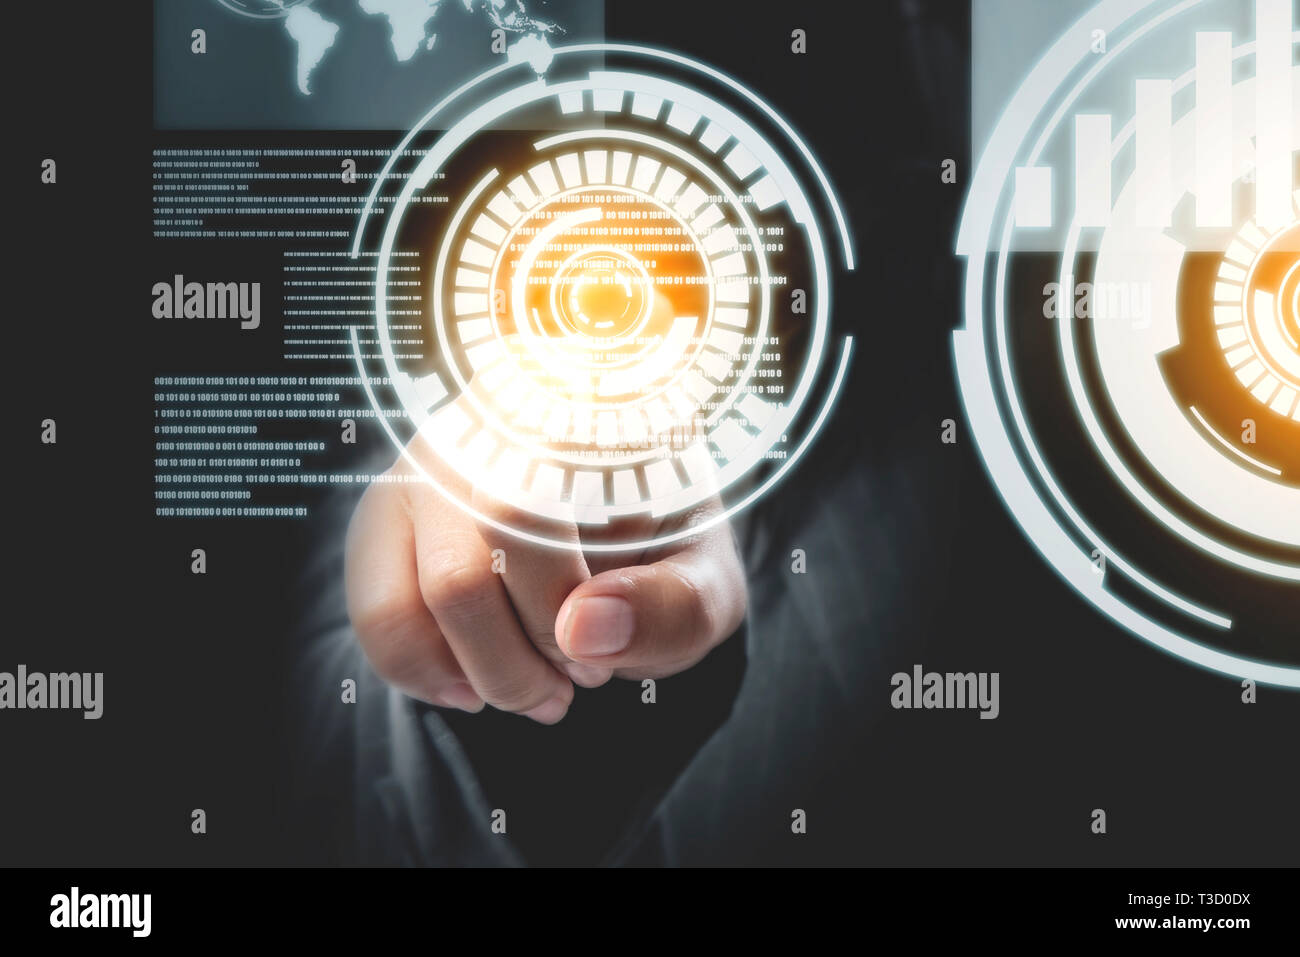 Closeup view of business woman touch a circle on virtual screen which display the interface of world maps and binary code. Digital technology concept Stock Photo